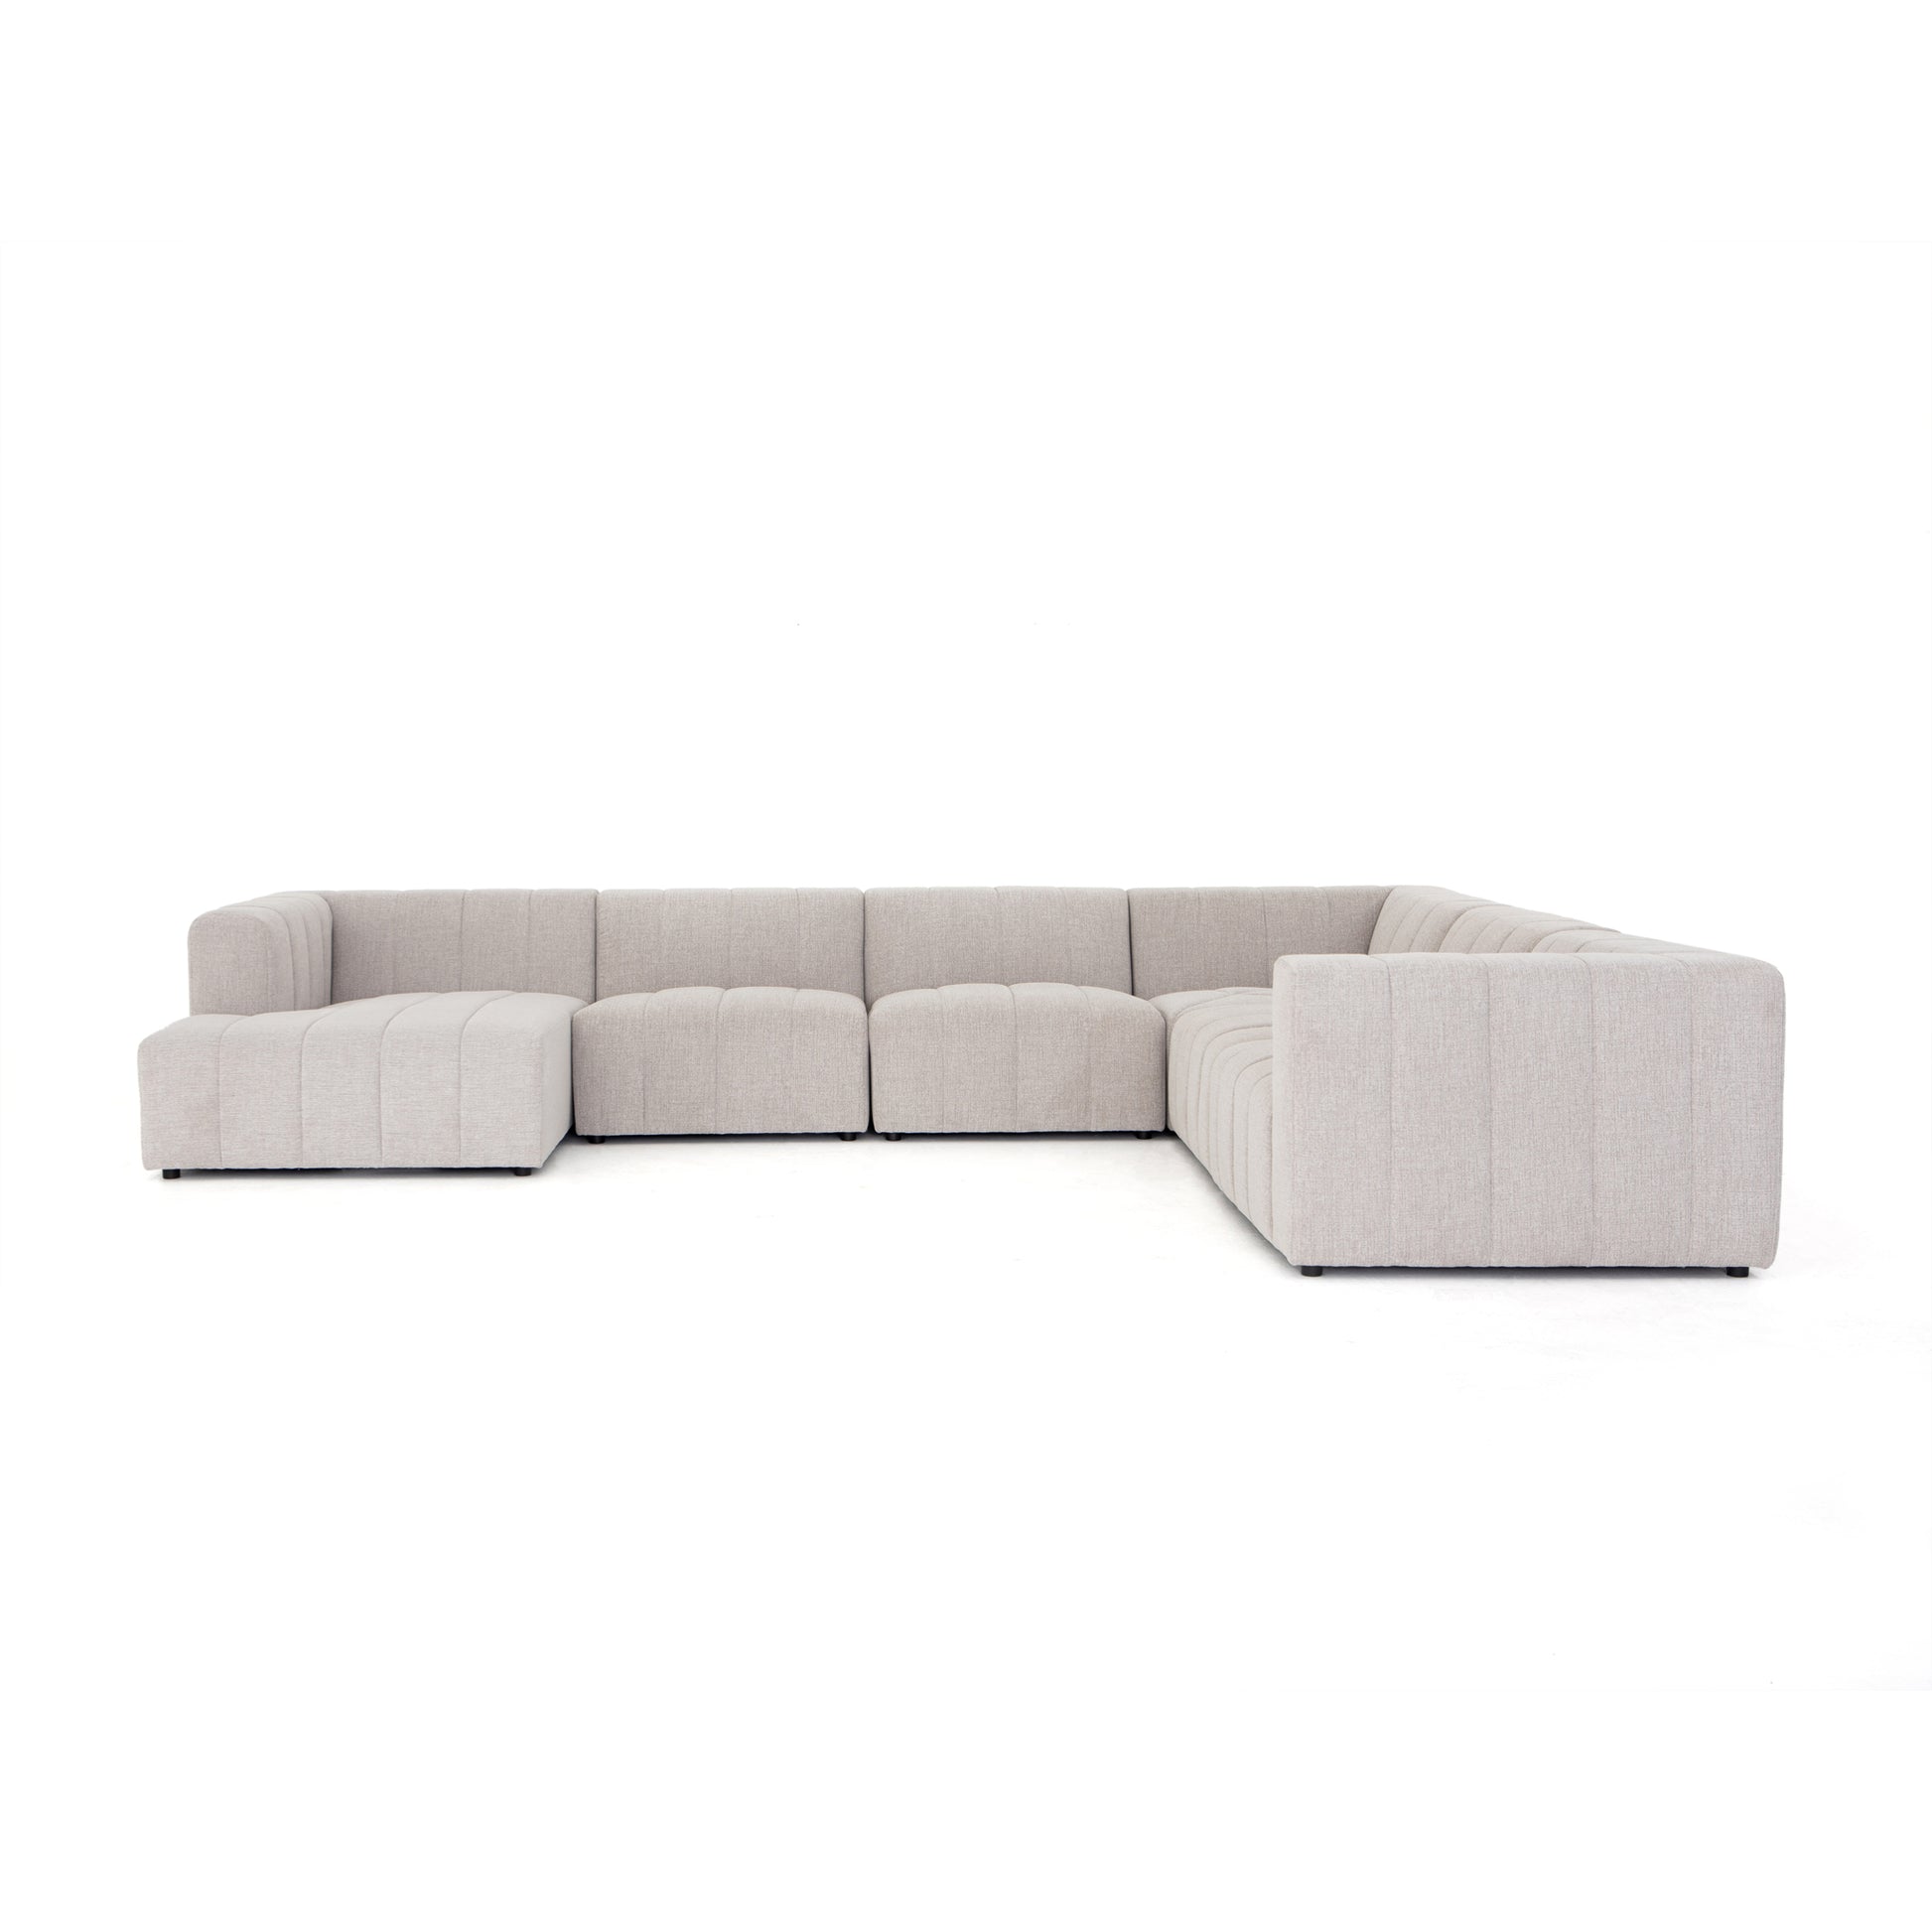 MOONLIT SECTIONAL